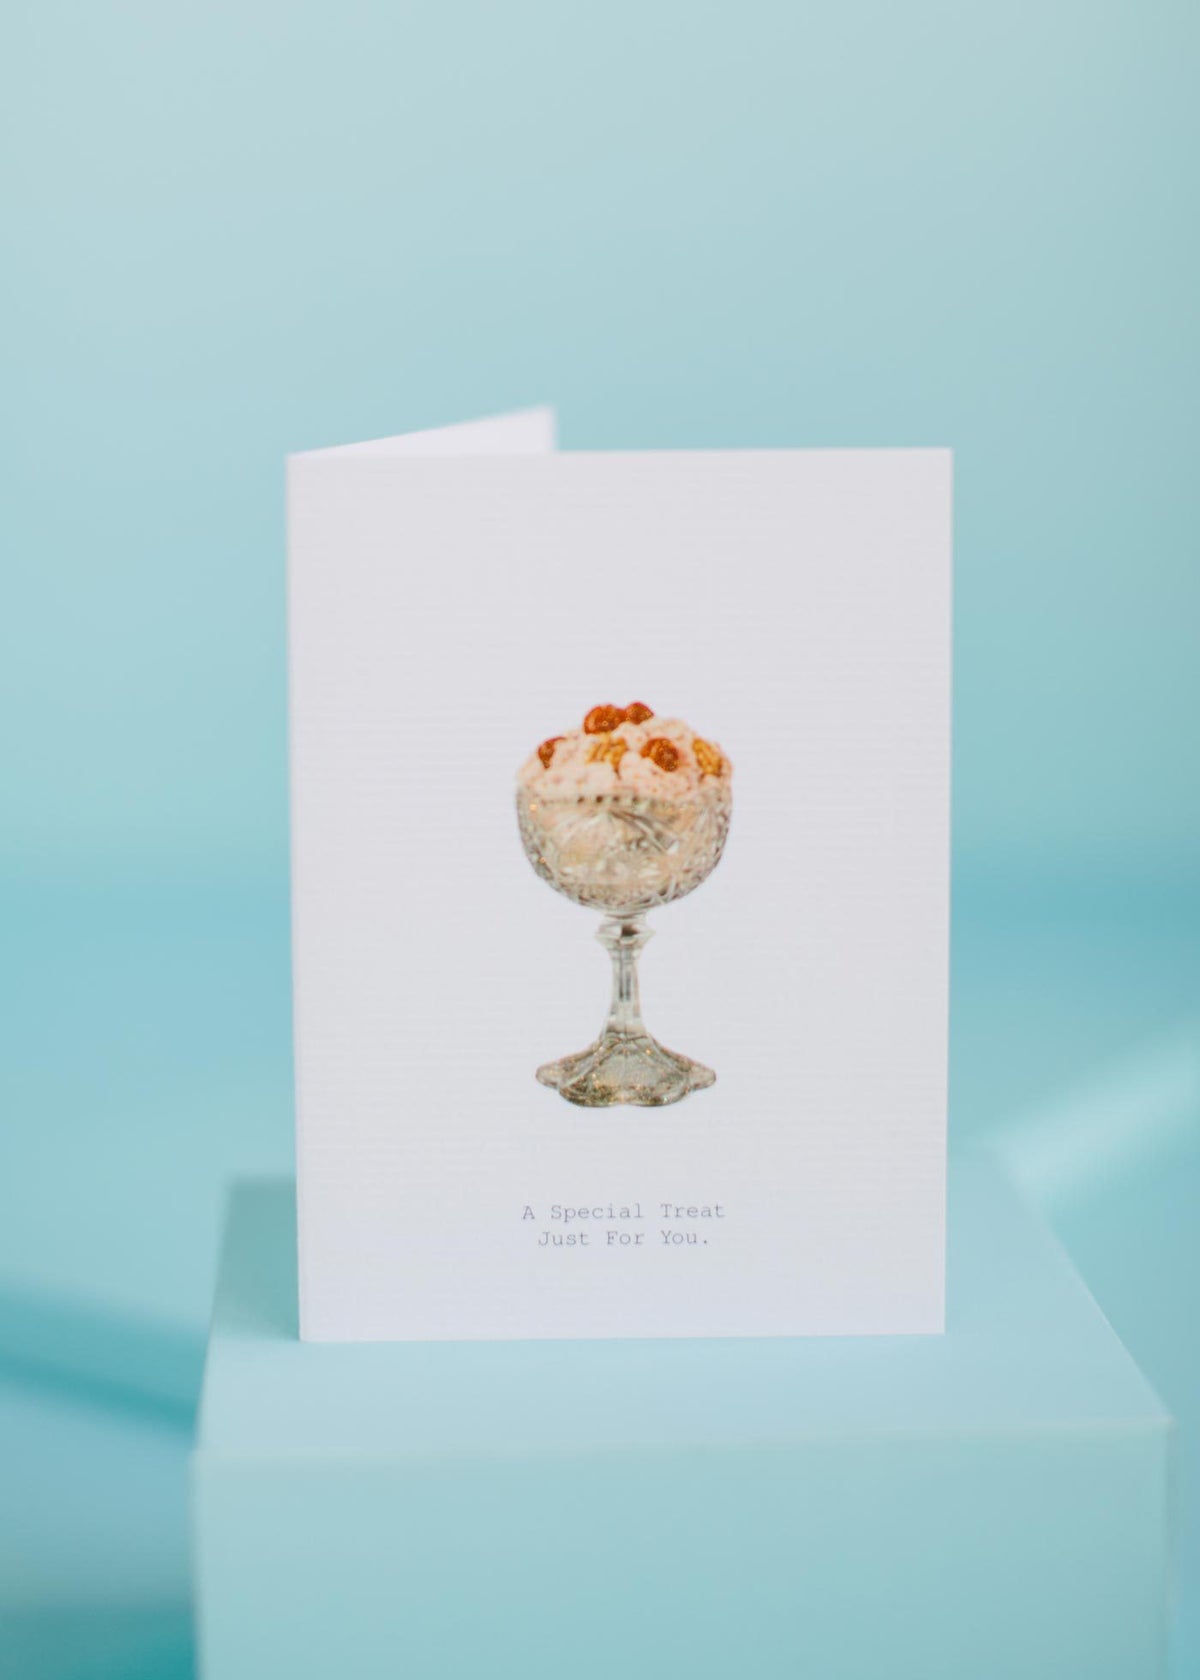 TokyoMilk Greeting Card - A Special Treat on a pale blue background featuring an image of a glass filled with a creamy dessert topped with nuts and the text "a special treat just for you," embellished with hand-glittered by Margot Elena.